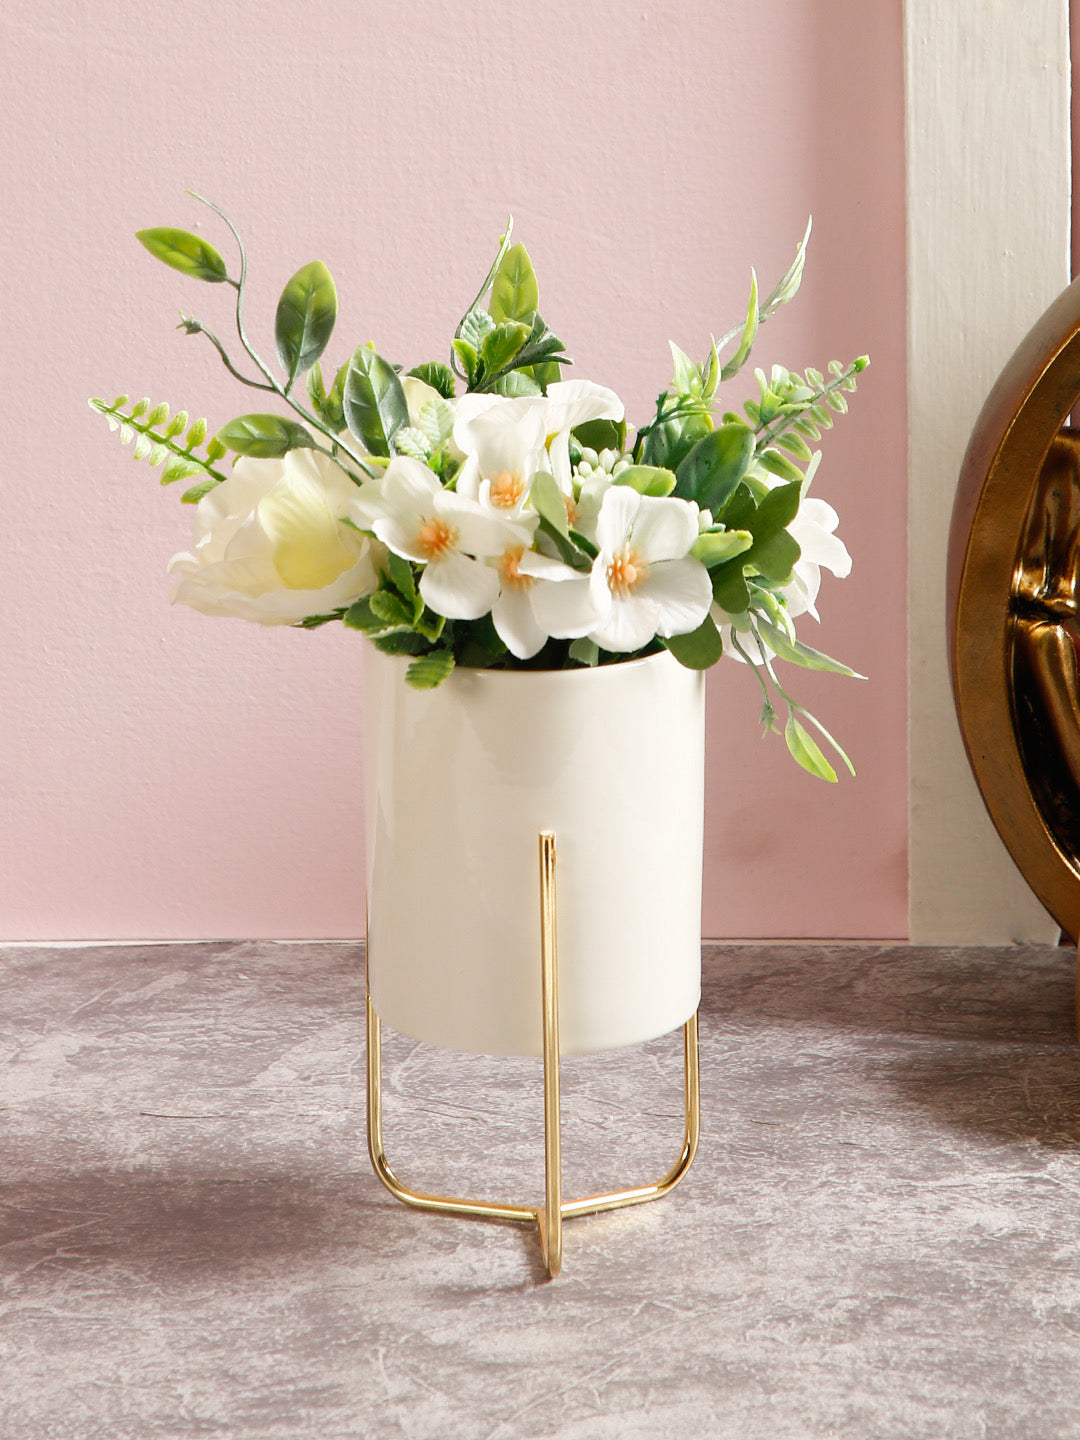 Decorative White pot with Artificial plant and Golden Stand - Default Title (APL21362)